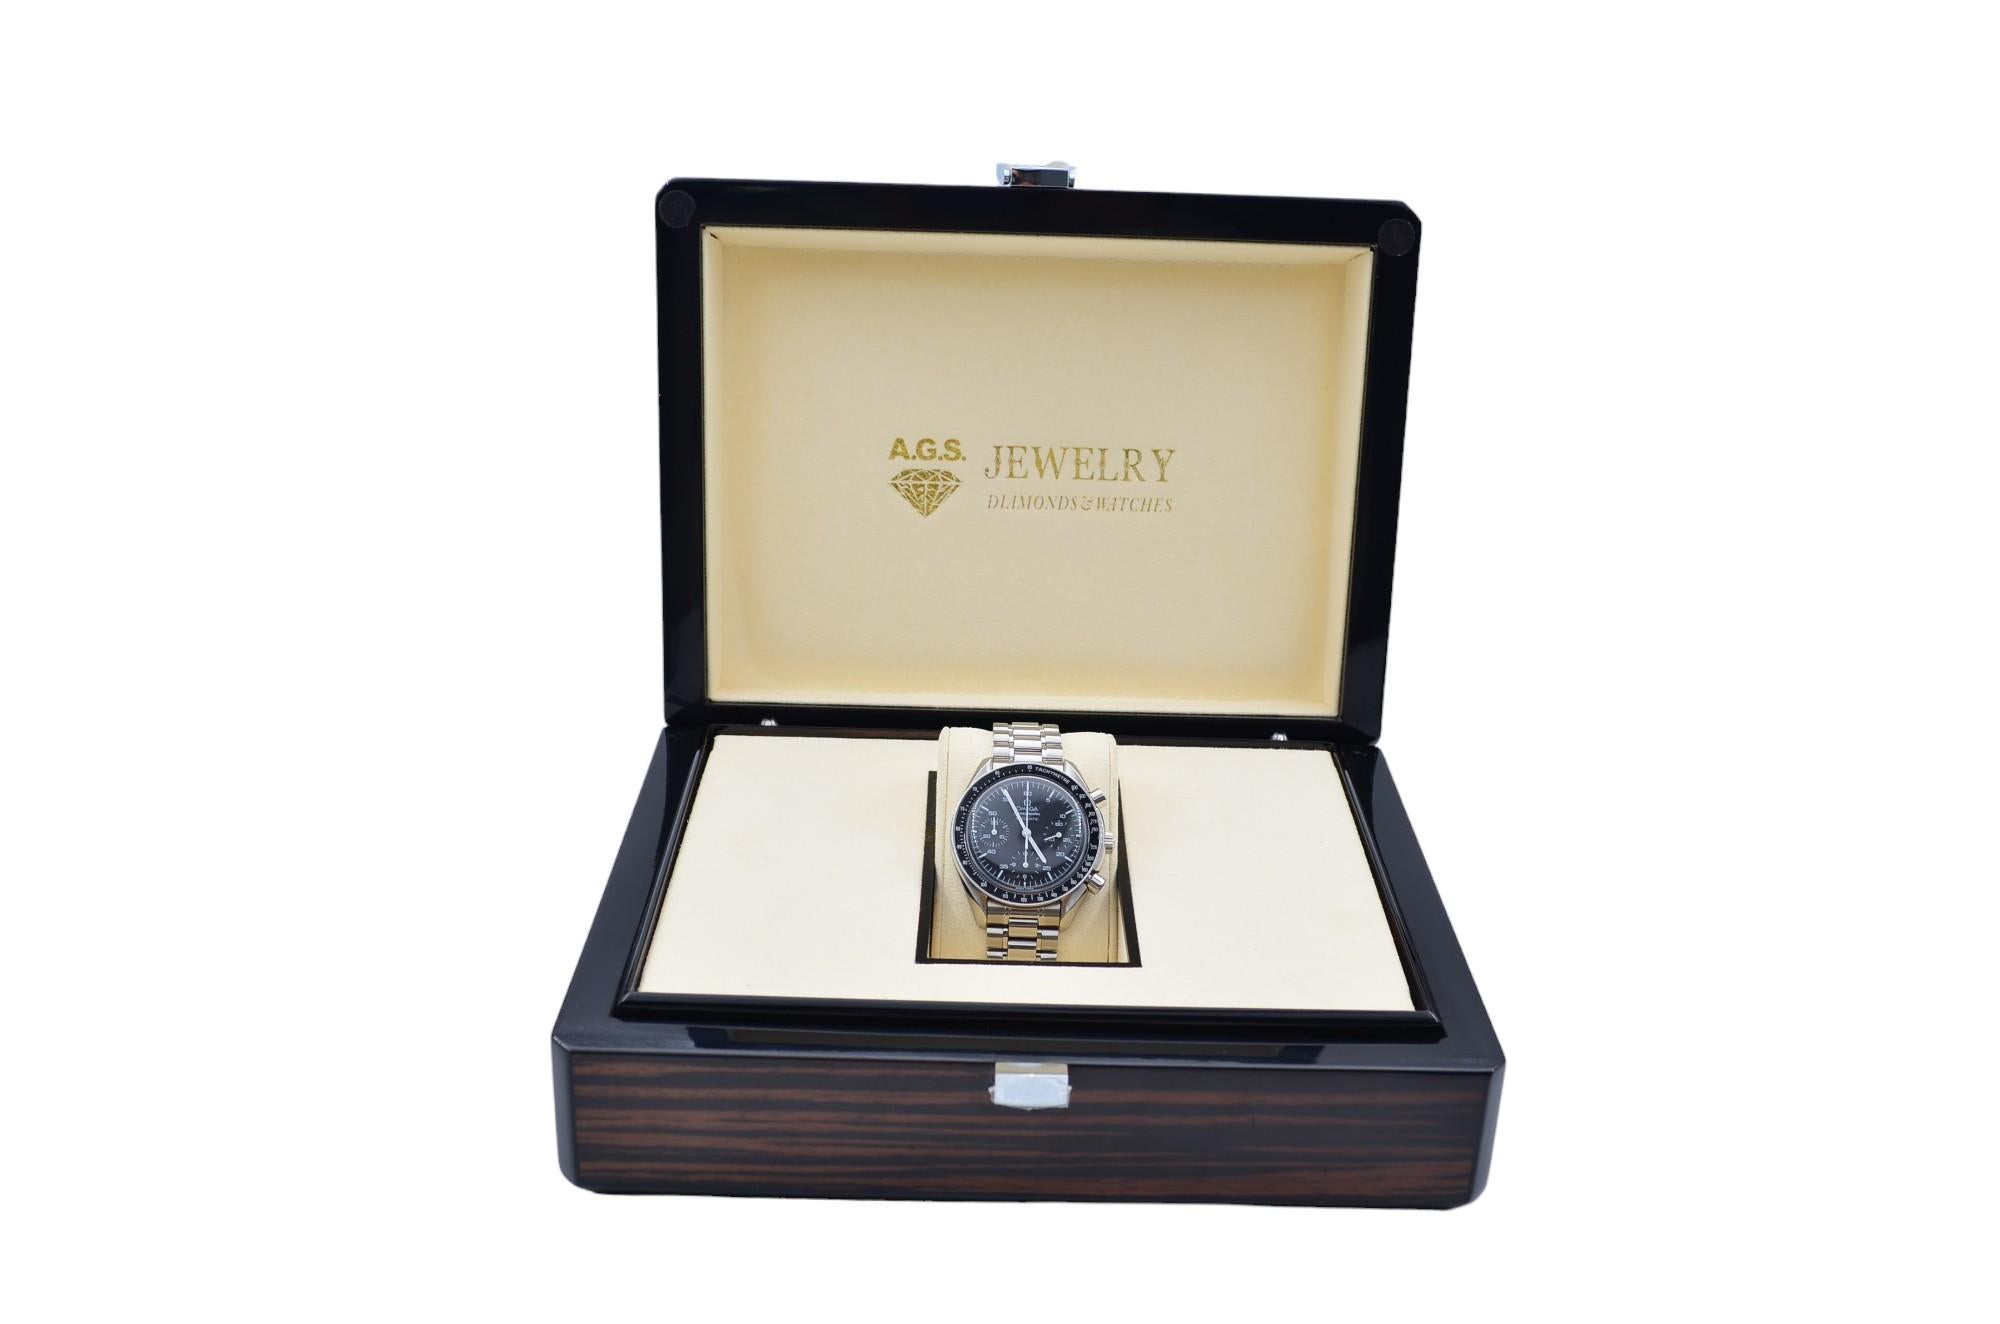 The watch is in a very good condition, it has professional polish and it’s working well. The total length of the bracelet (case+bracelet) is 18.5cm. The watch comes with an AGS Jewelry wooden box, along with an AGS Jewelry warranty card. For more